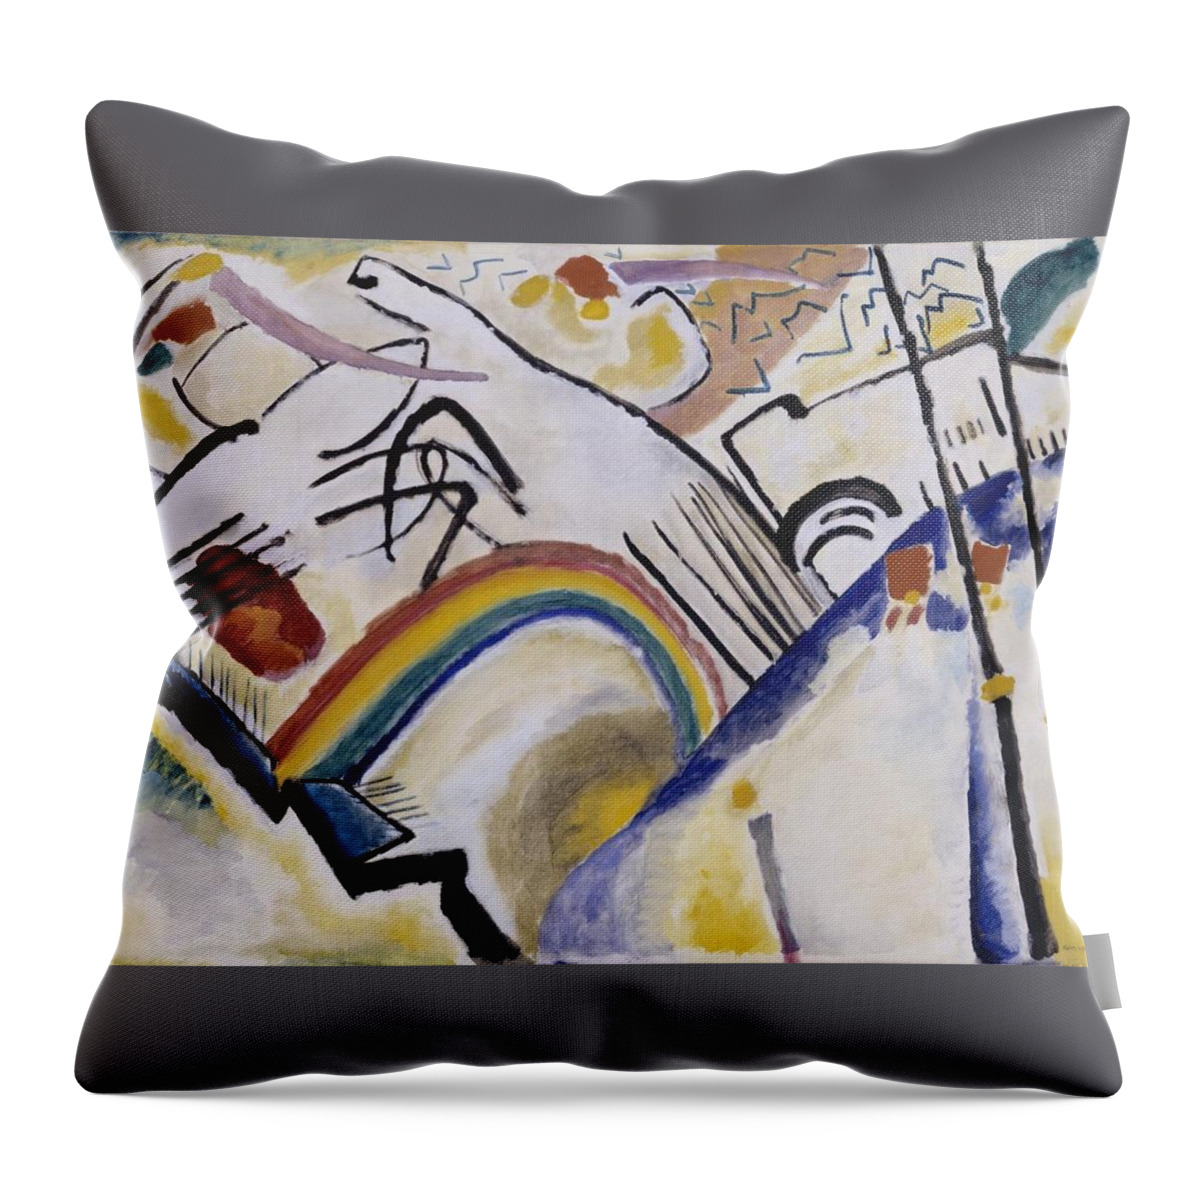 Wassily Kandinsky 18661944  Cossacks Cosaques Throw Pillow featuring the painting Wassily Kandinsky by Cossacks Cosaques